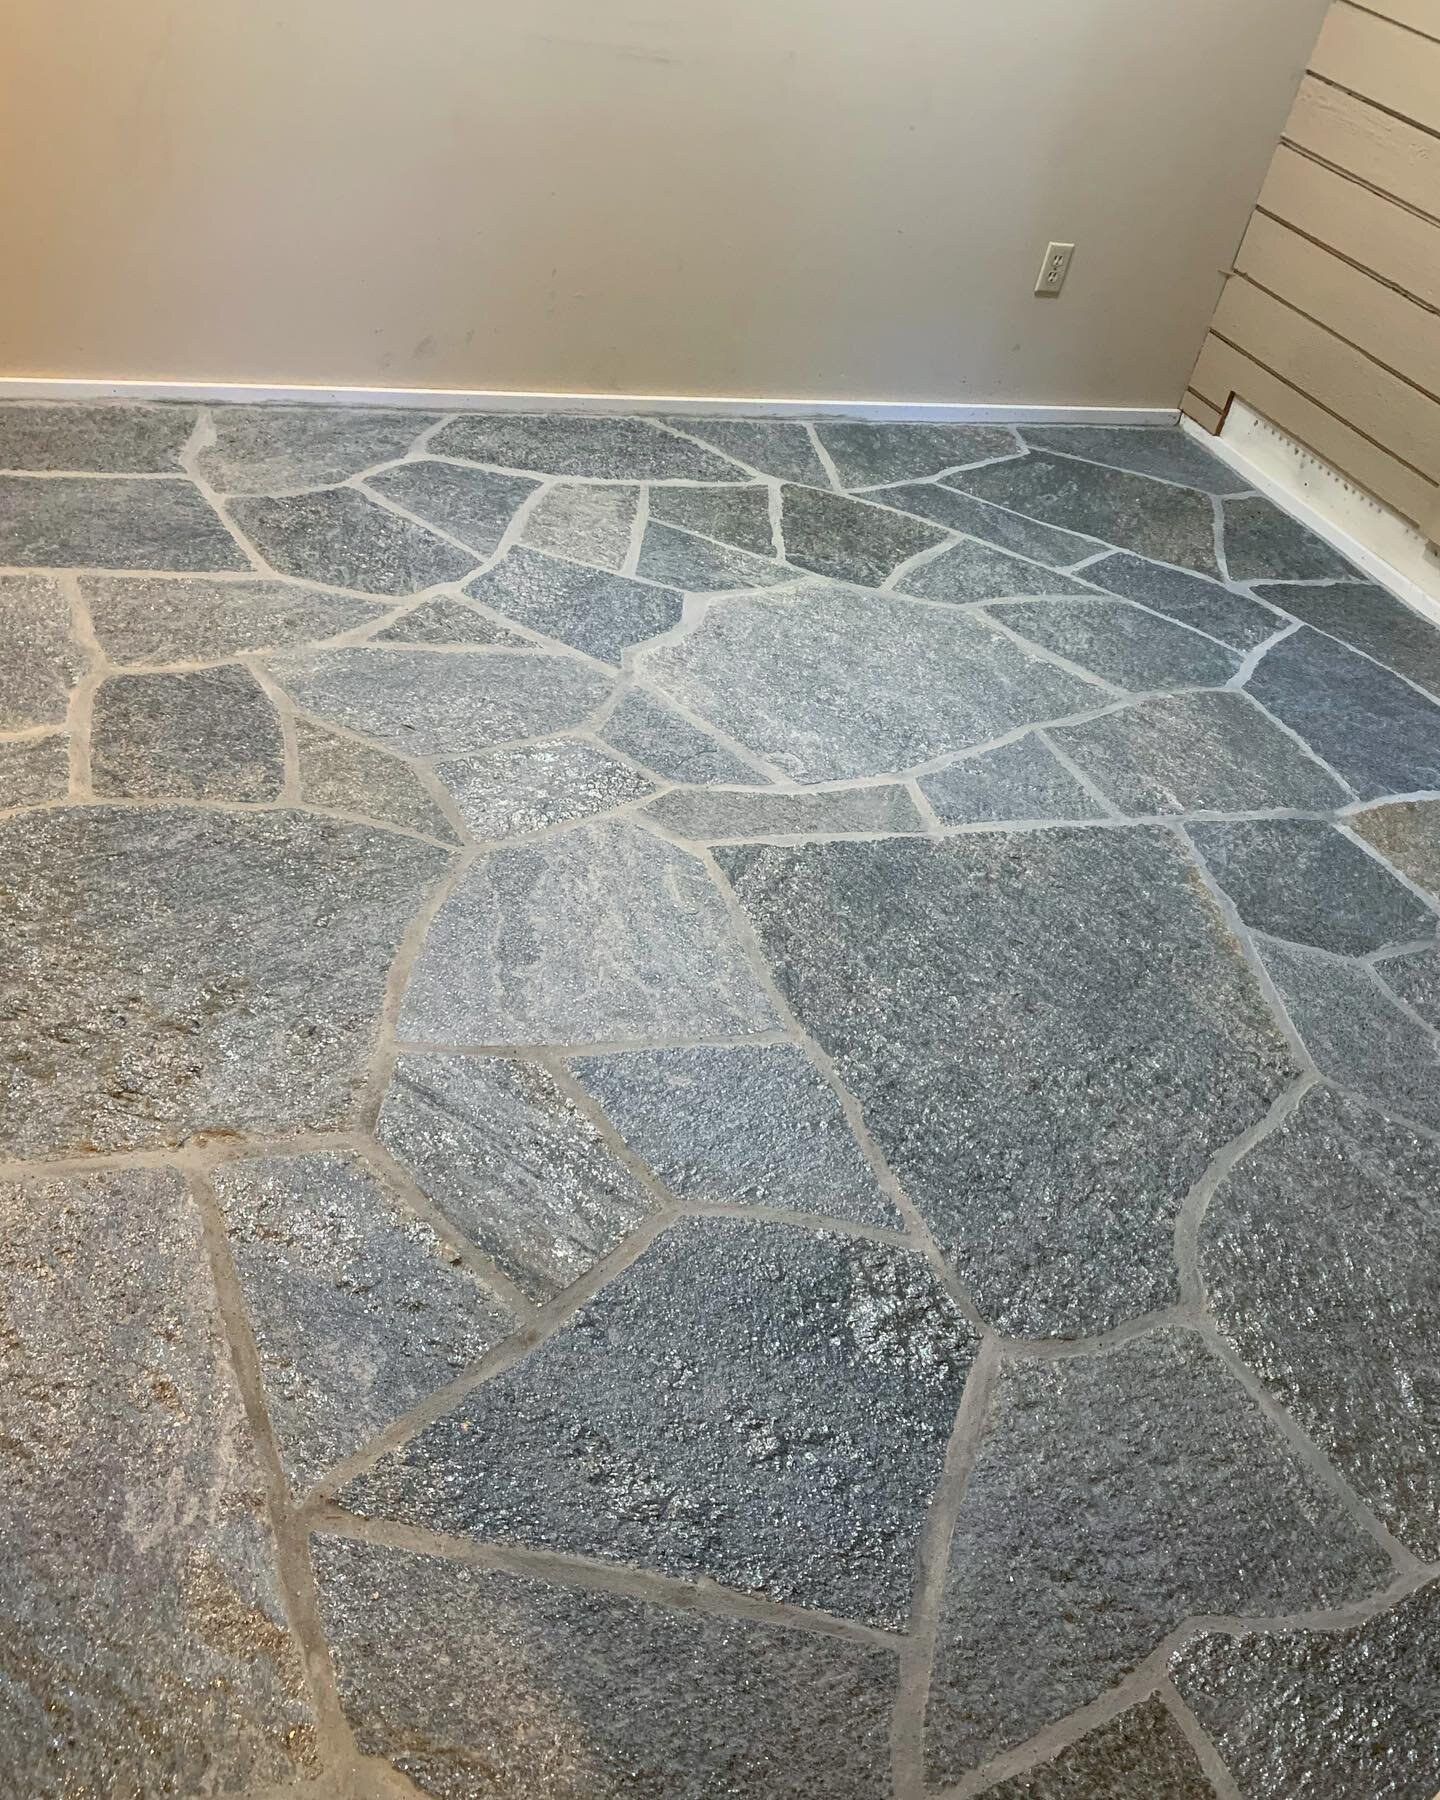 Challenging project creating this all natural stone floor for a cozy Whistler cabin 🏠⛰Custom design with Mica Slate Flag Stone! #whistlernaturalstone #naturalstone #masonry #stonemasonry #stonefloor #naturalstonefloor #aderastone #aderastonesupply #